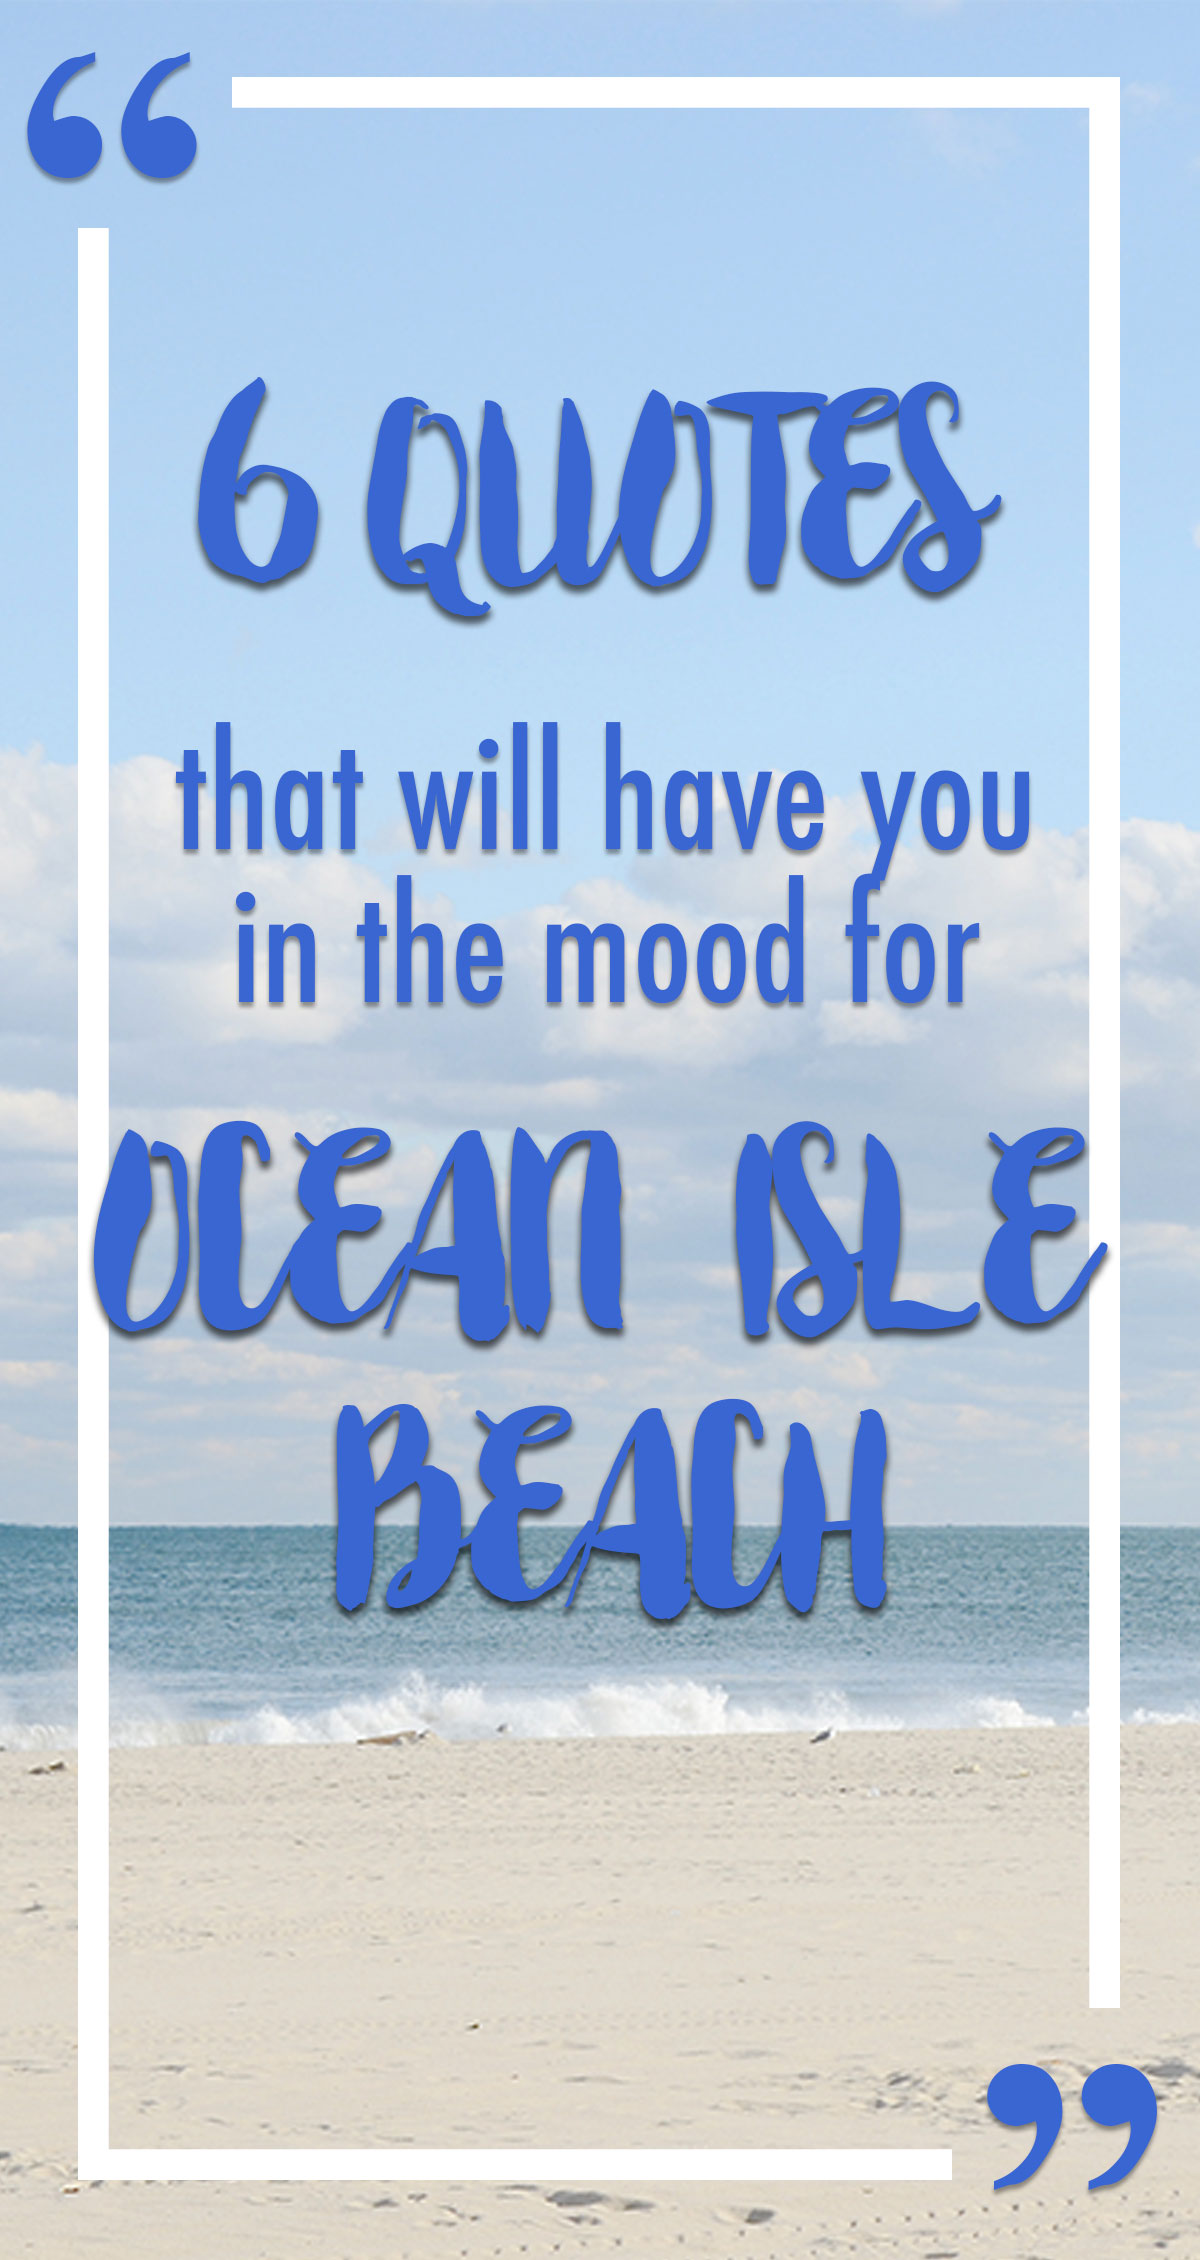 6 Quotes That Will Have You in the Mood for Ocean Isle Beach Pin